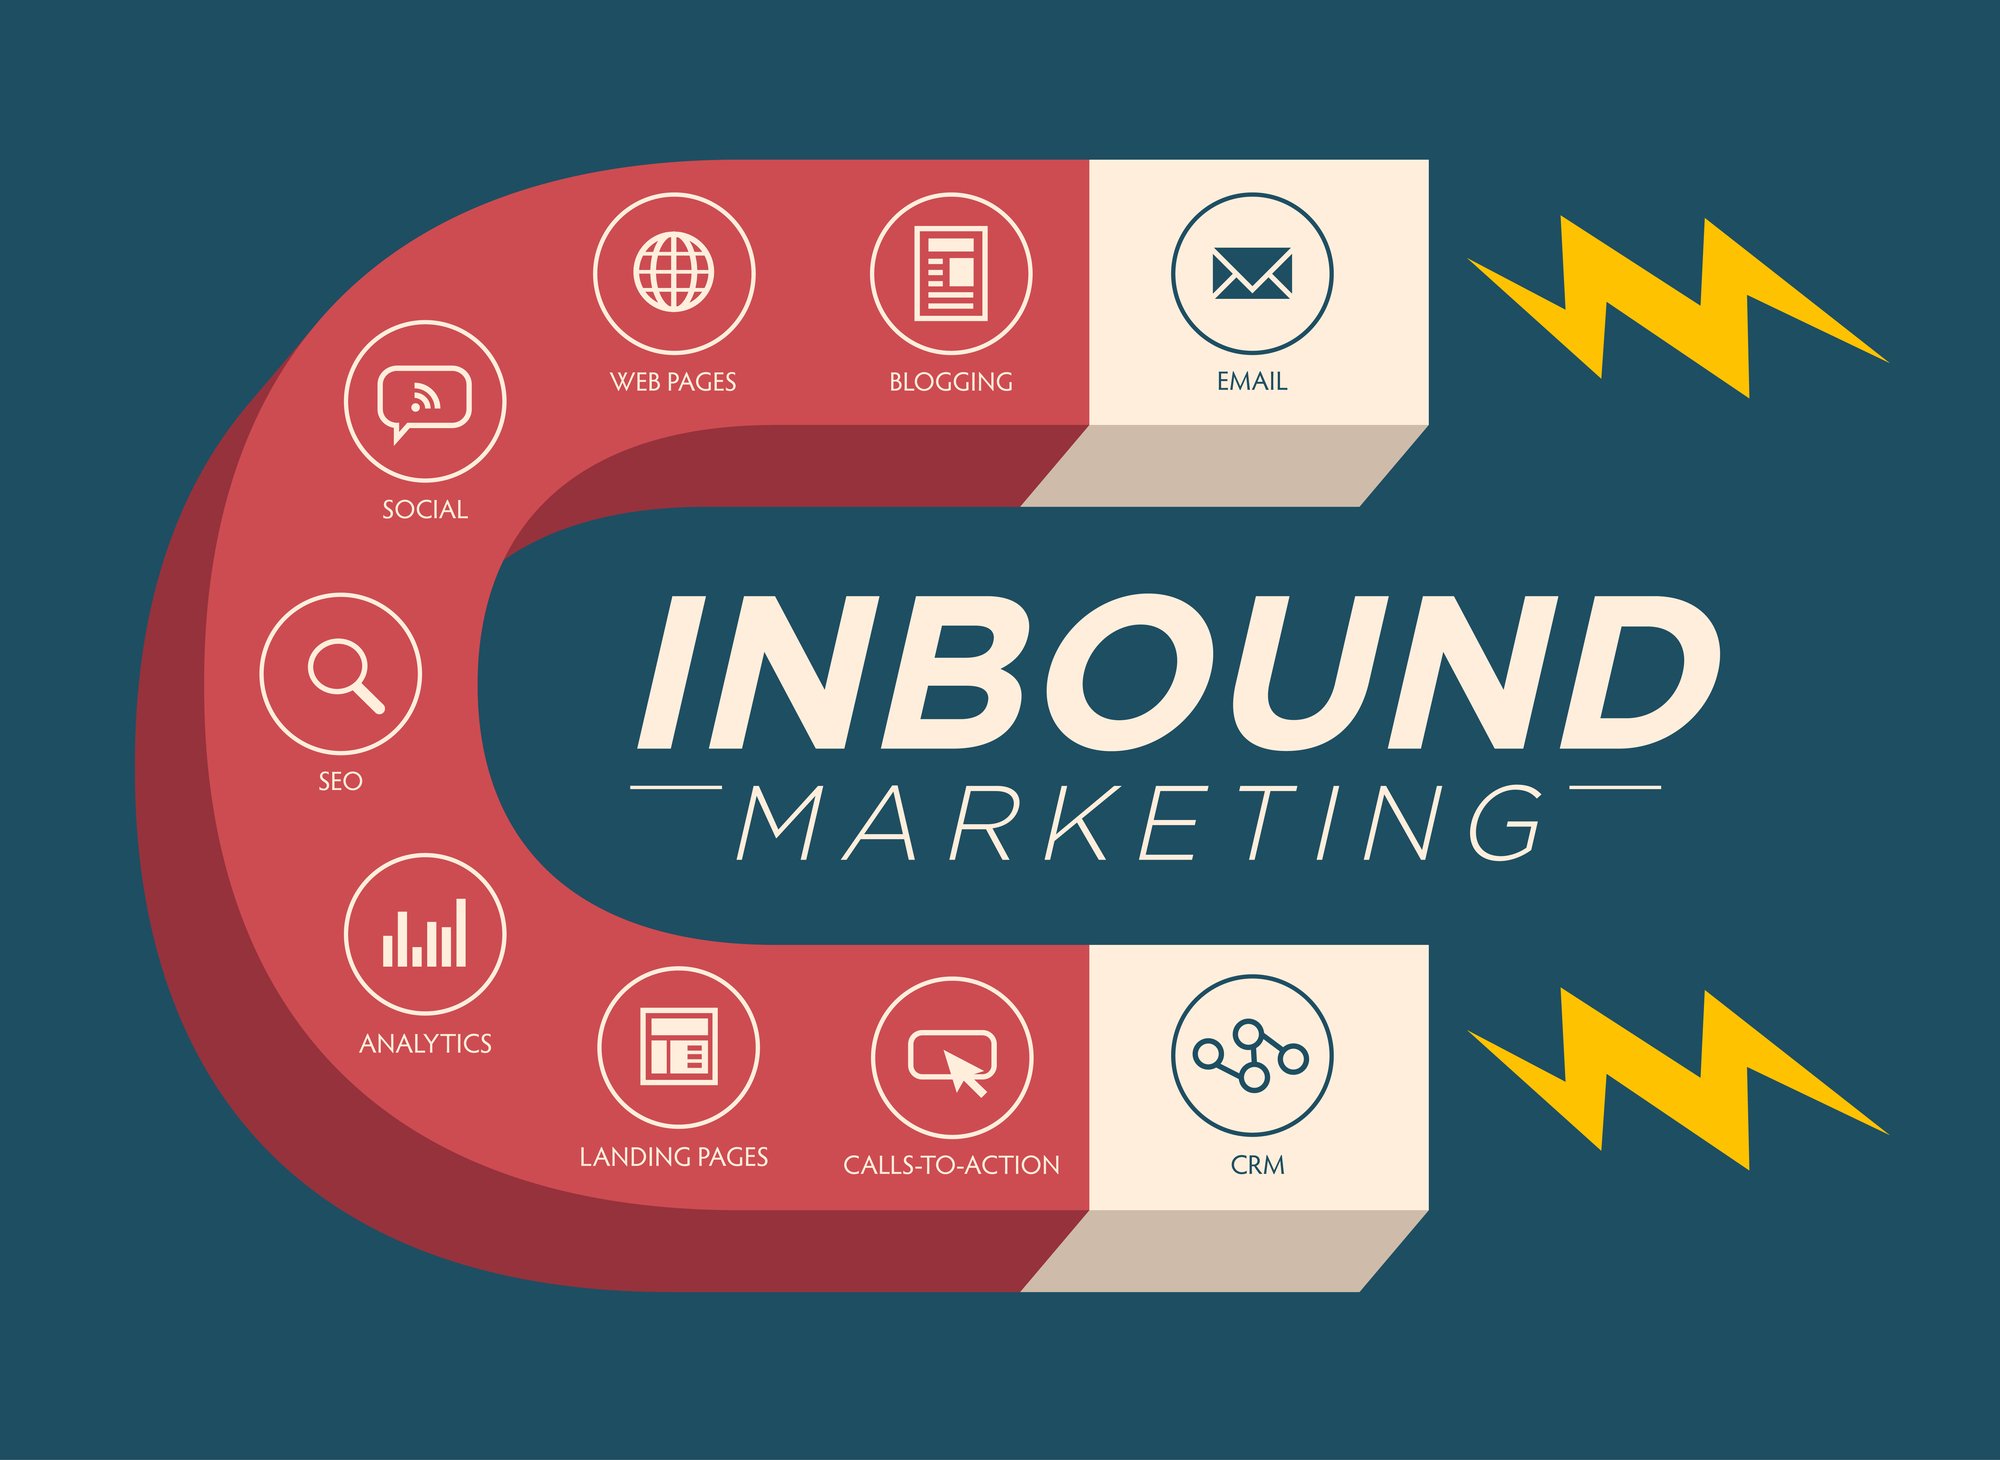 Inbound Marketing Magnet Graphic with Blogging, Web Pages, Social, Call to Action or CTA, email, landing page, analytics or reporting, and CRM